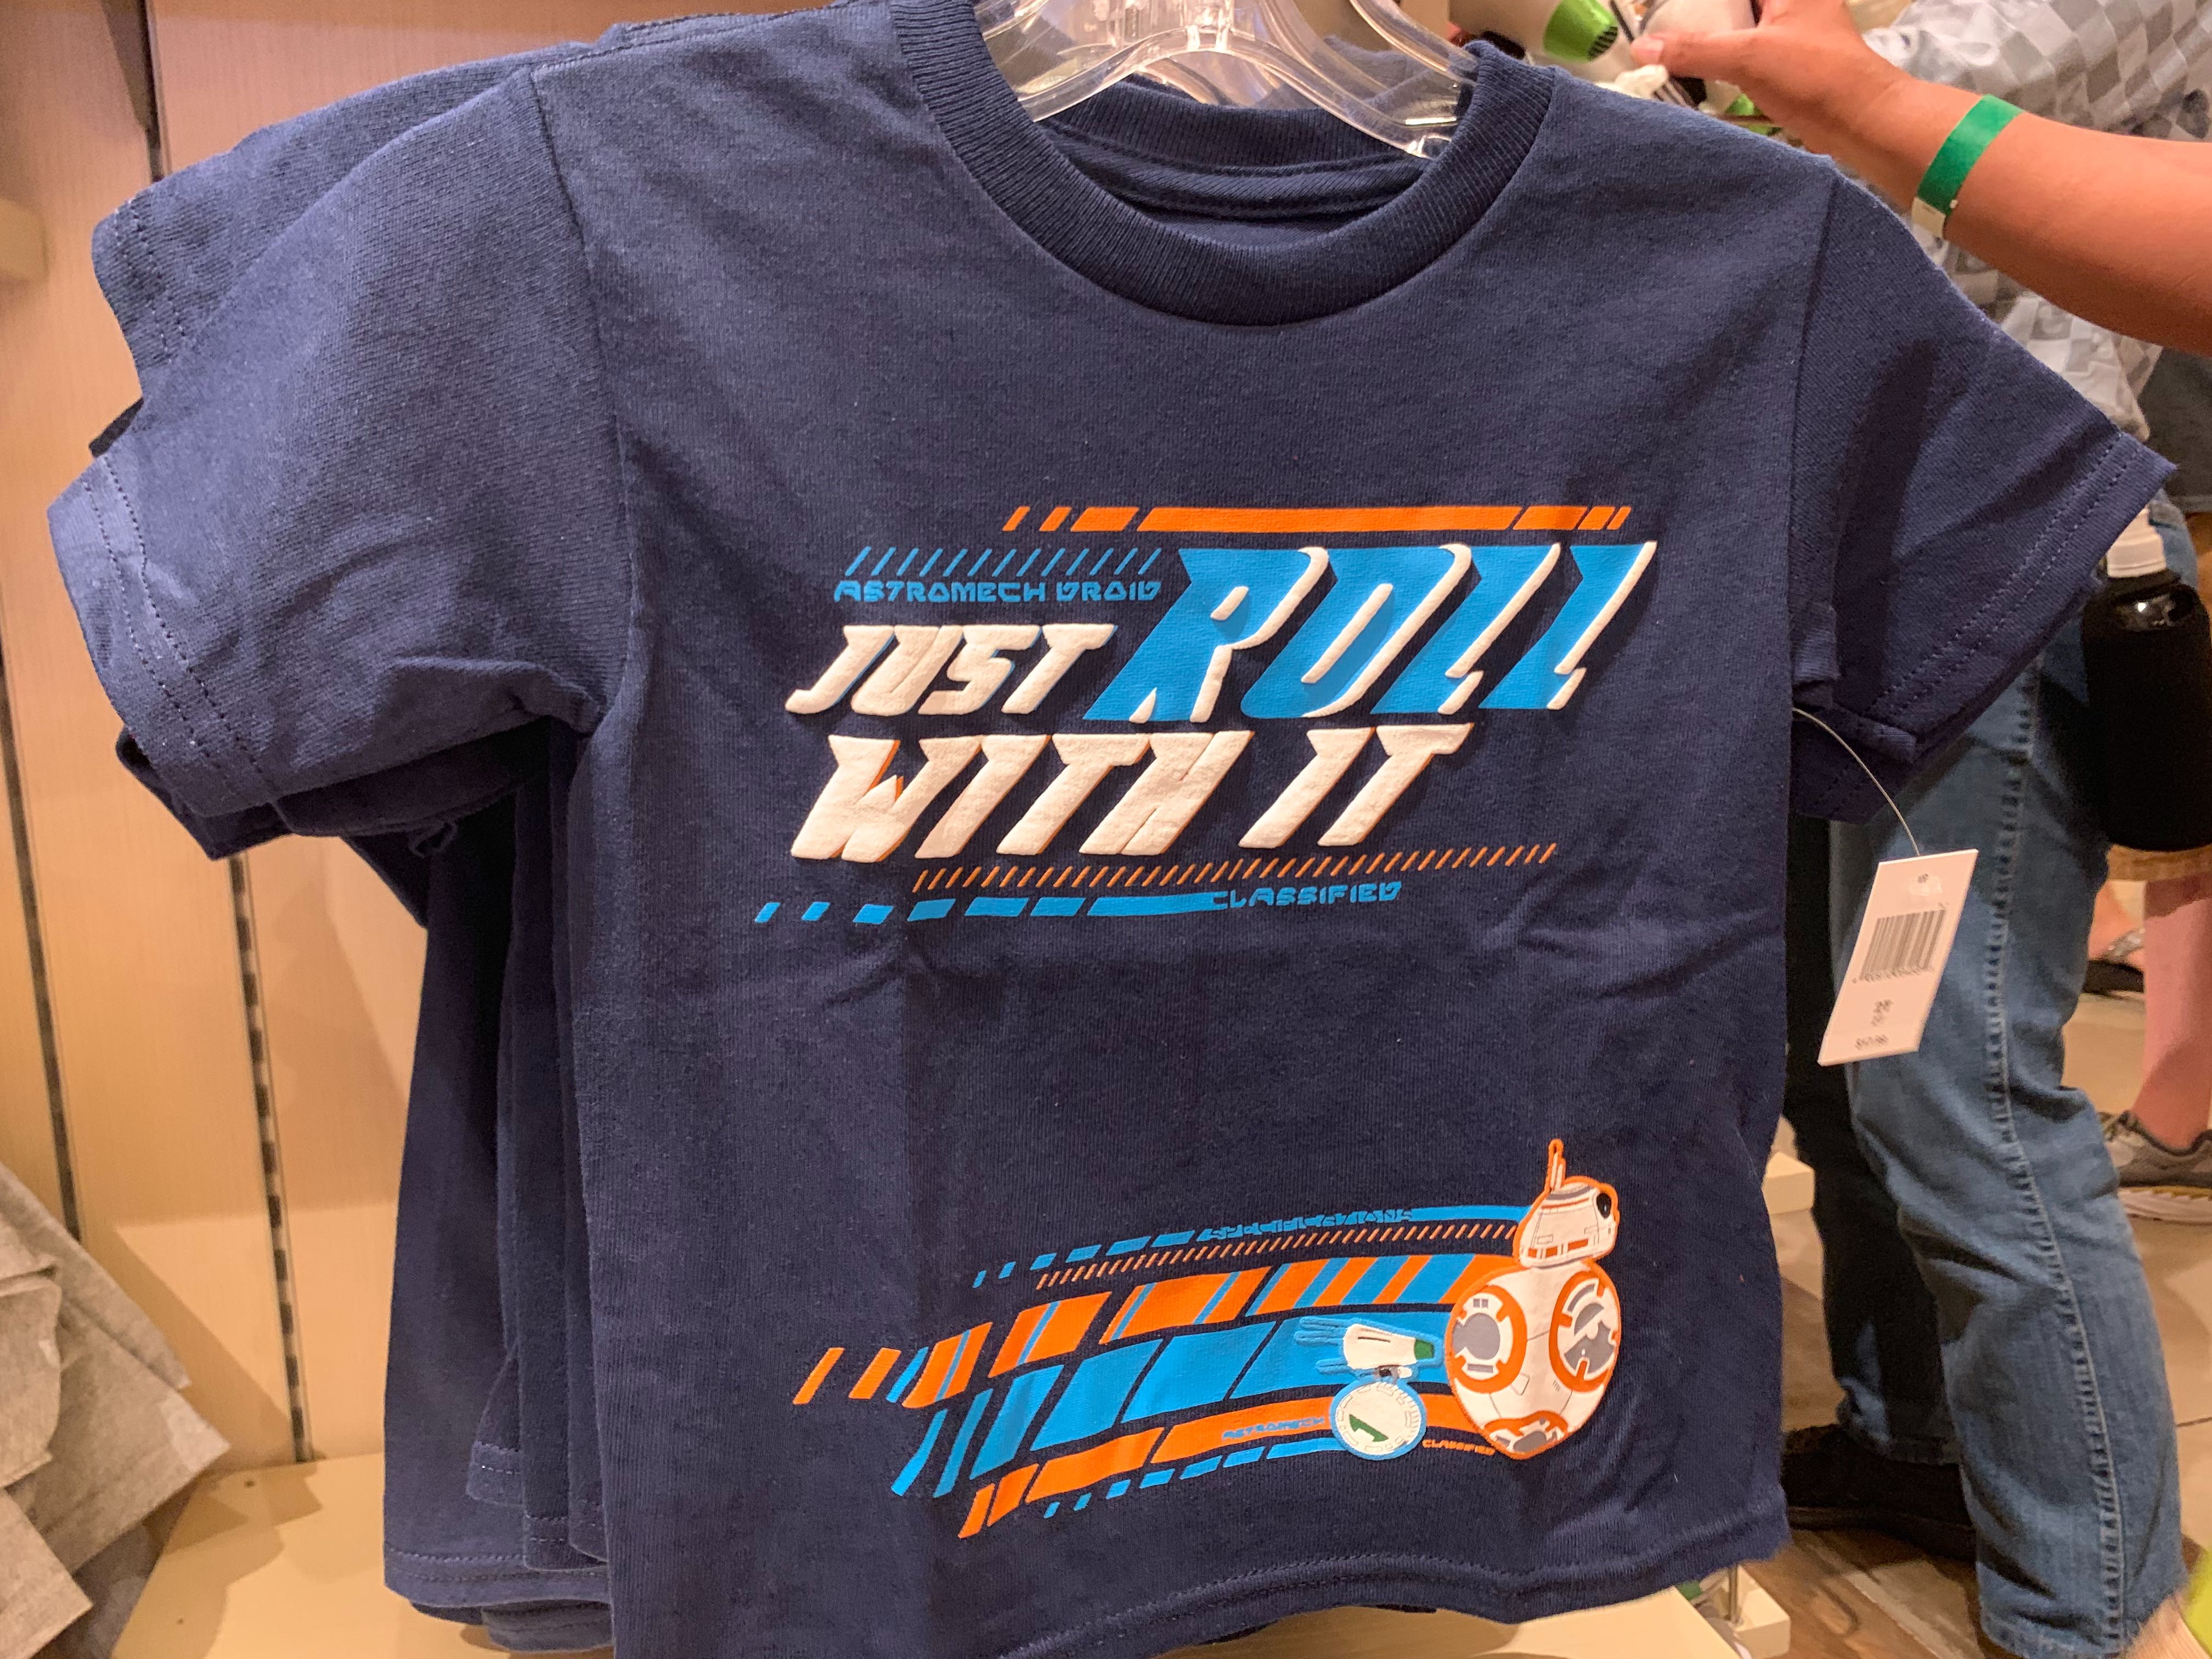 Kids Just Roll with it $17.99